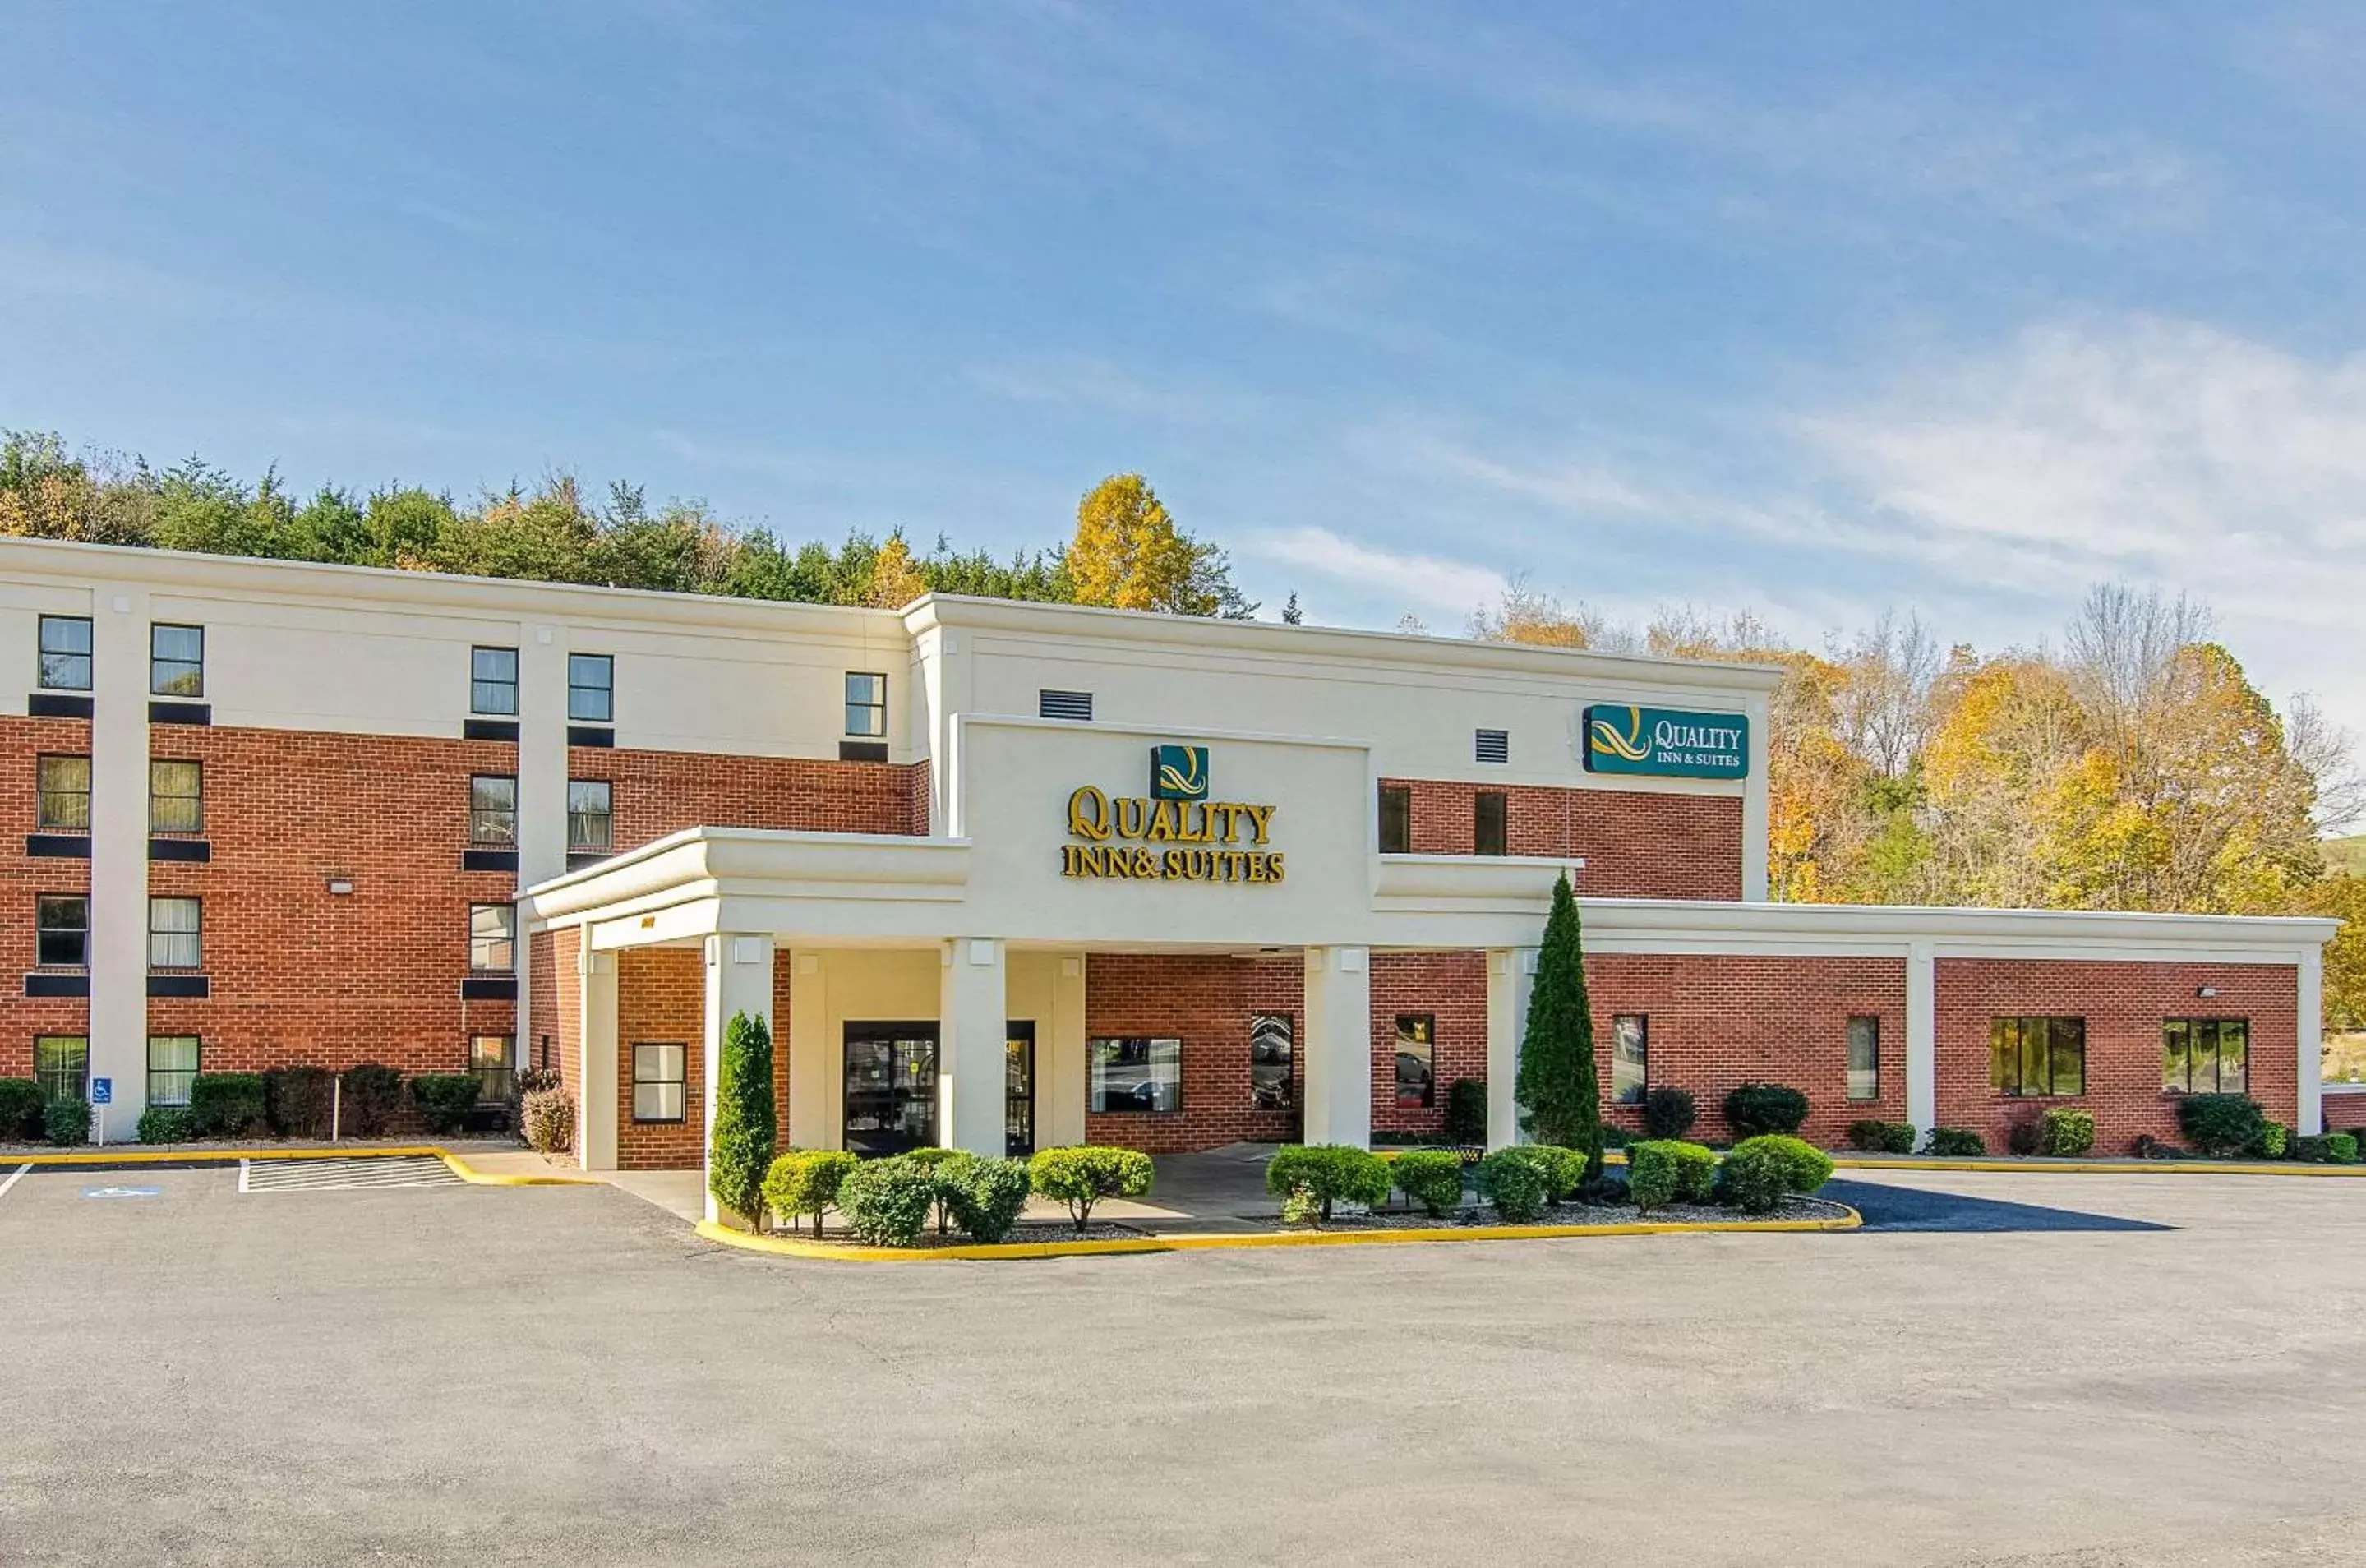 Property Building in Quality Inn & Suites Lexington near I-64 and I-81